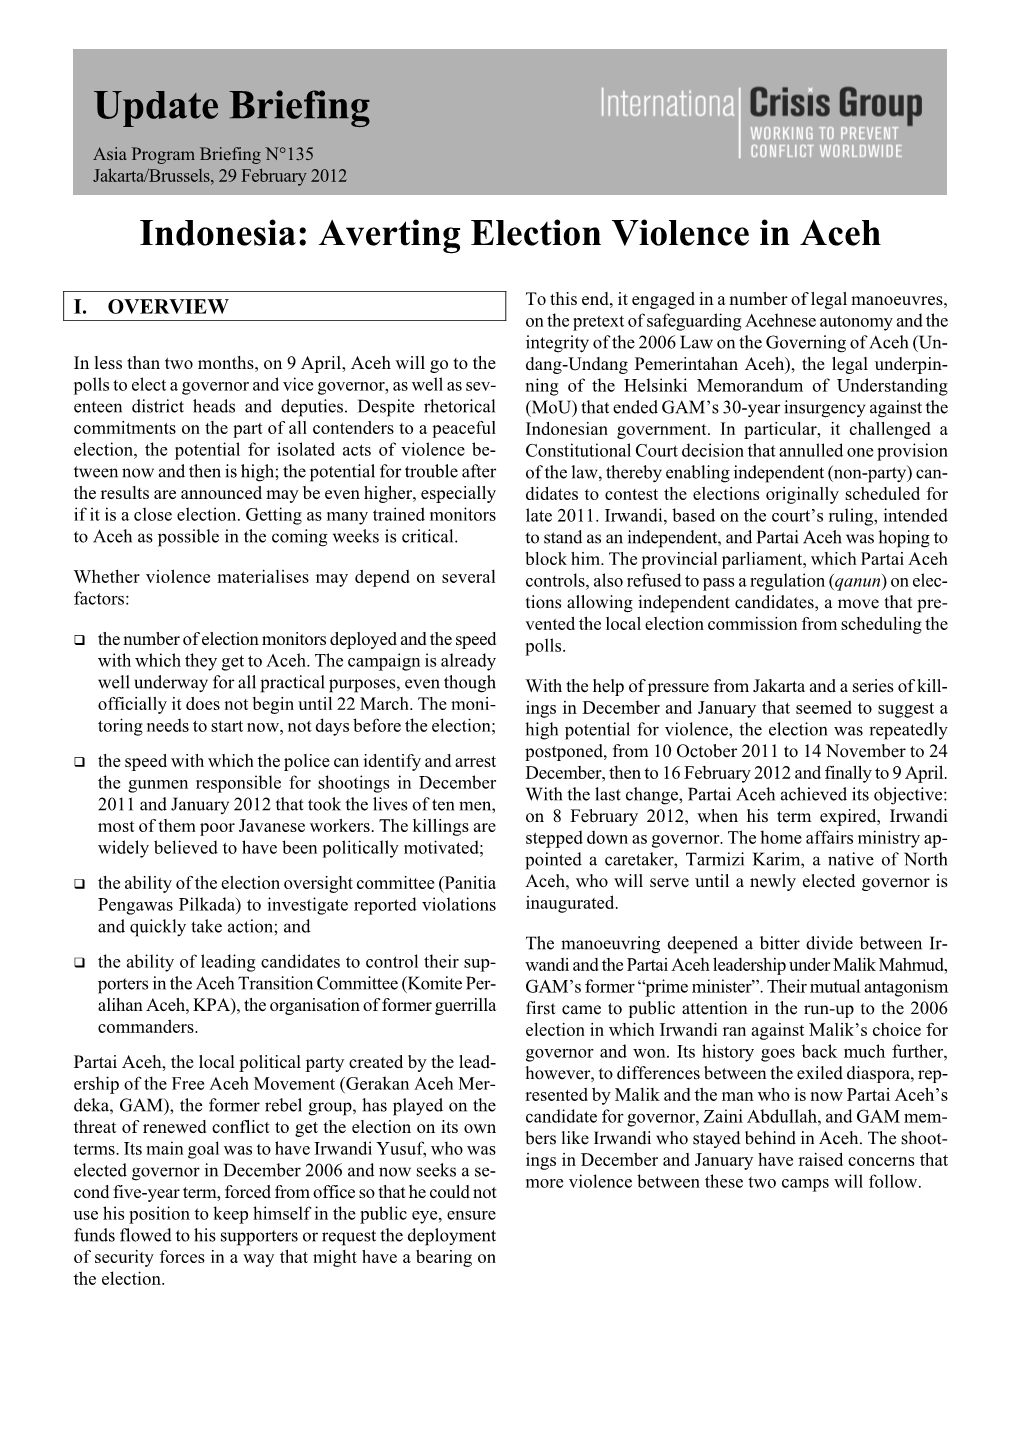 Averting Election Violence in Aceh